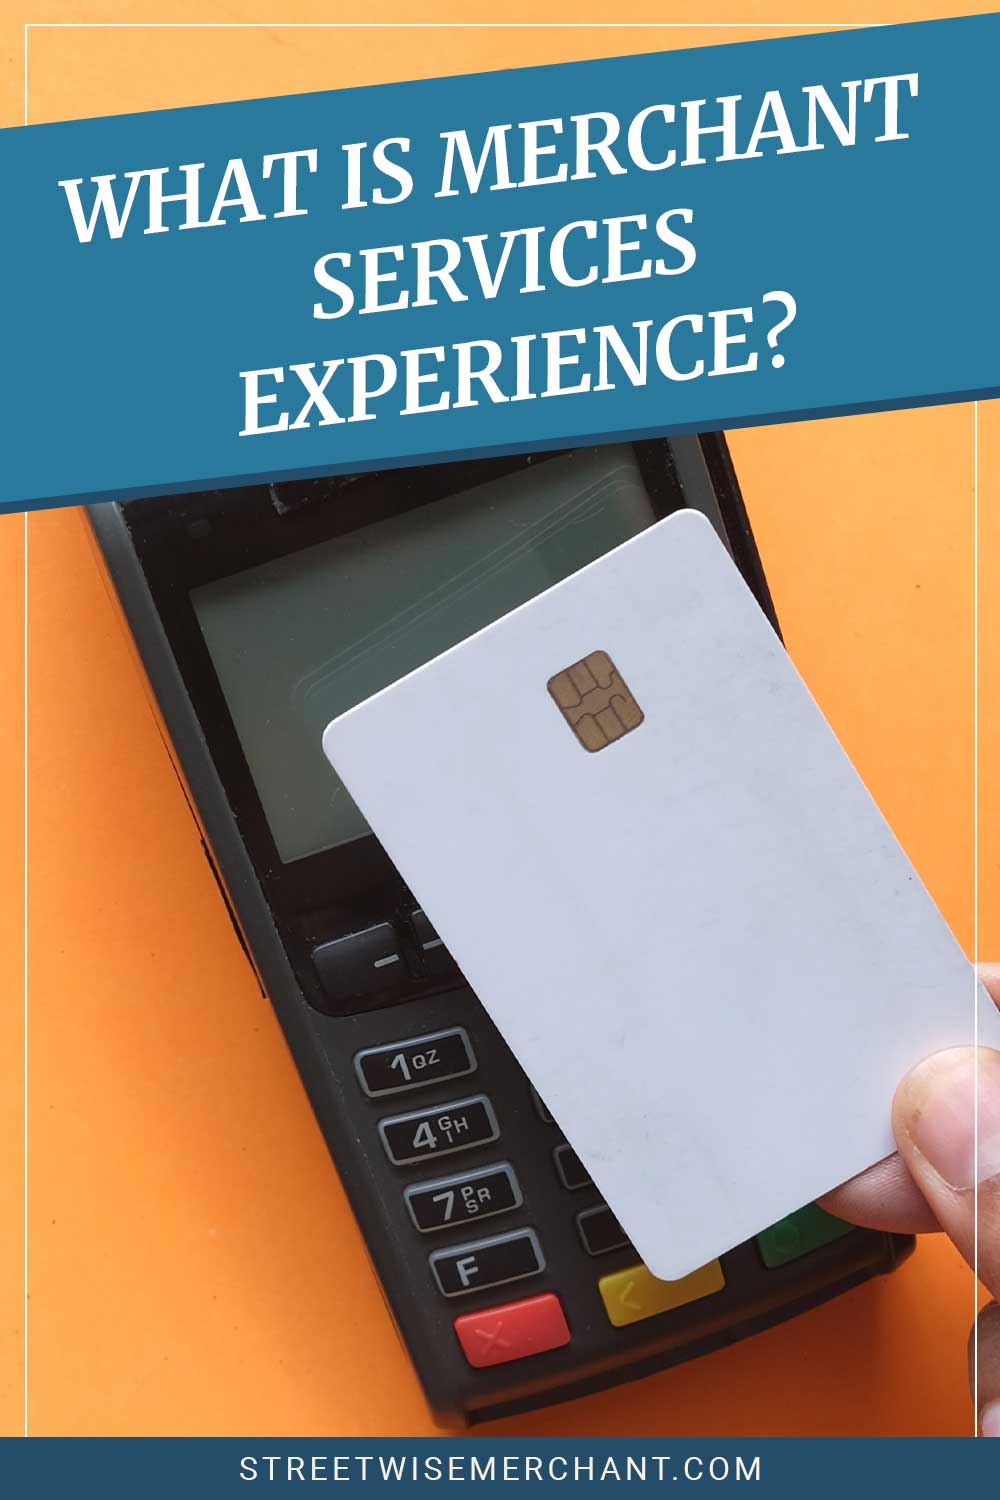 A white blank credit card on a POS transaction machine - What is Merchant Services Experience?